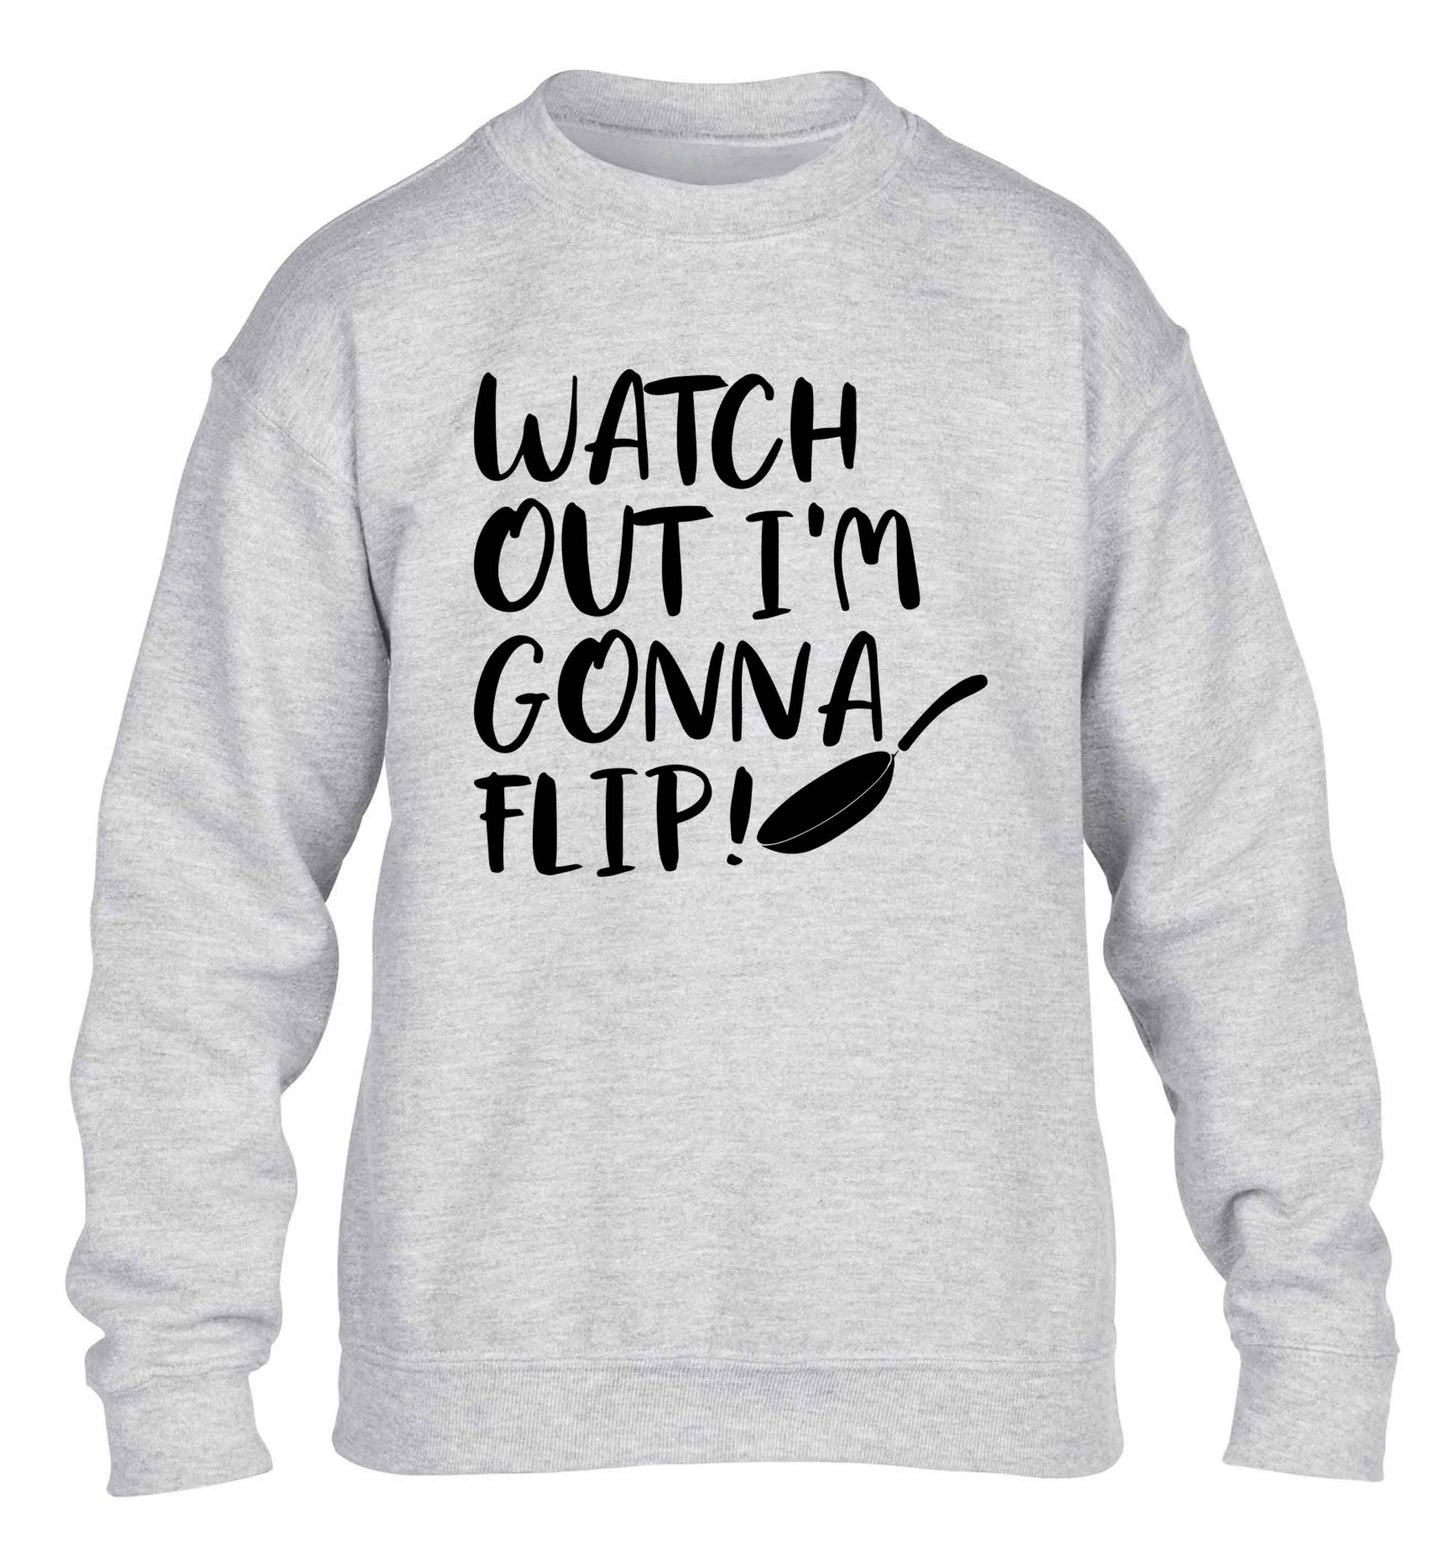 Watch out I'm gonna flip! children's grey sweater 12-13 Years